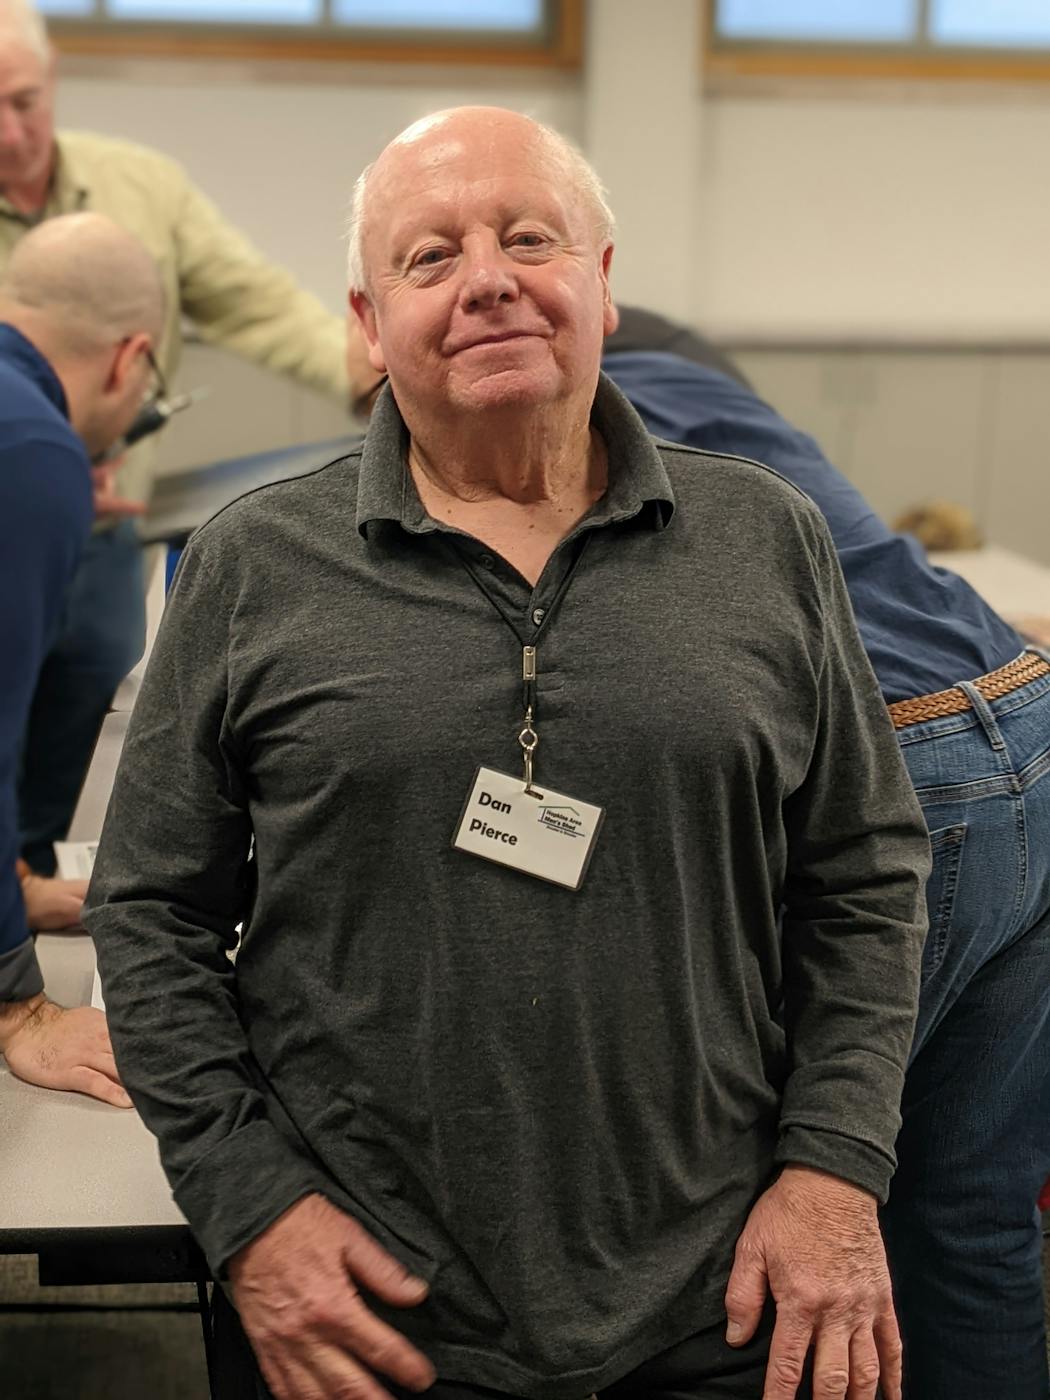 Hopkins Men's Shed is one of ten such groups in Minnesota, and thousands around the world. Dan Pierce became involved with the group in 2016, not long after it was formed.